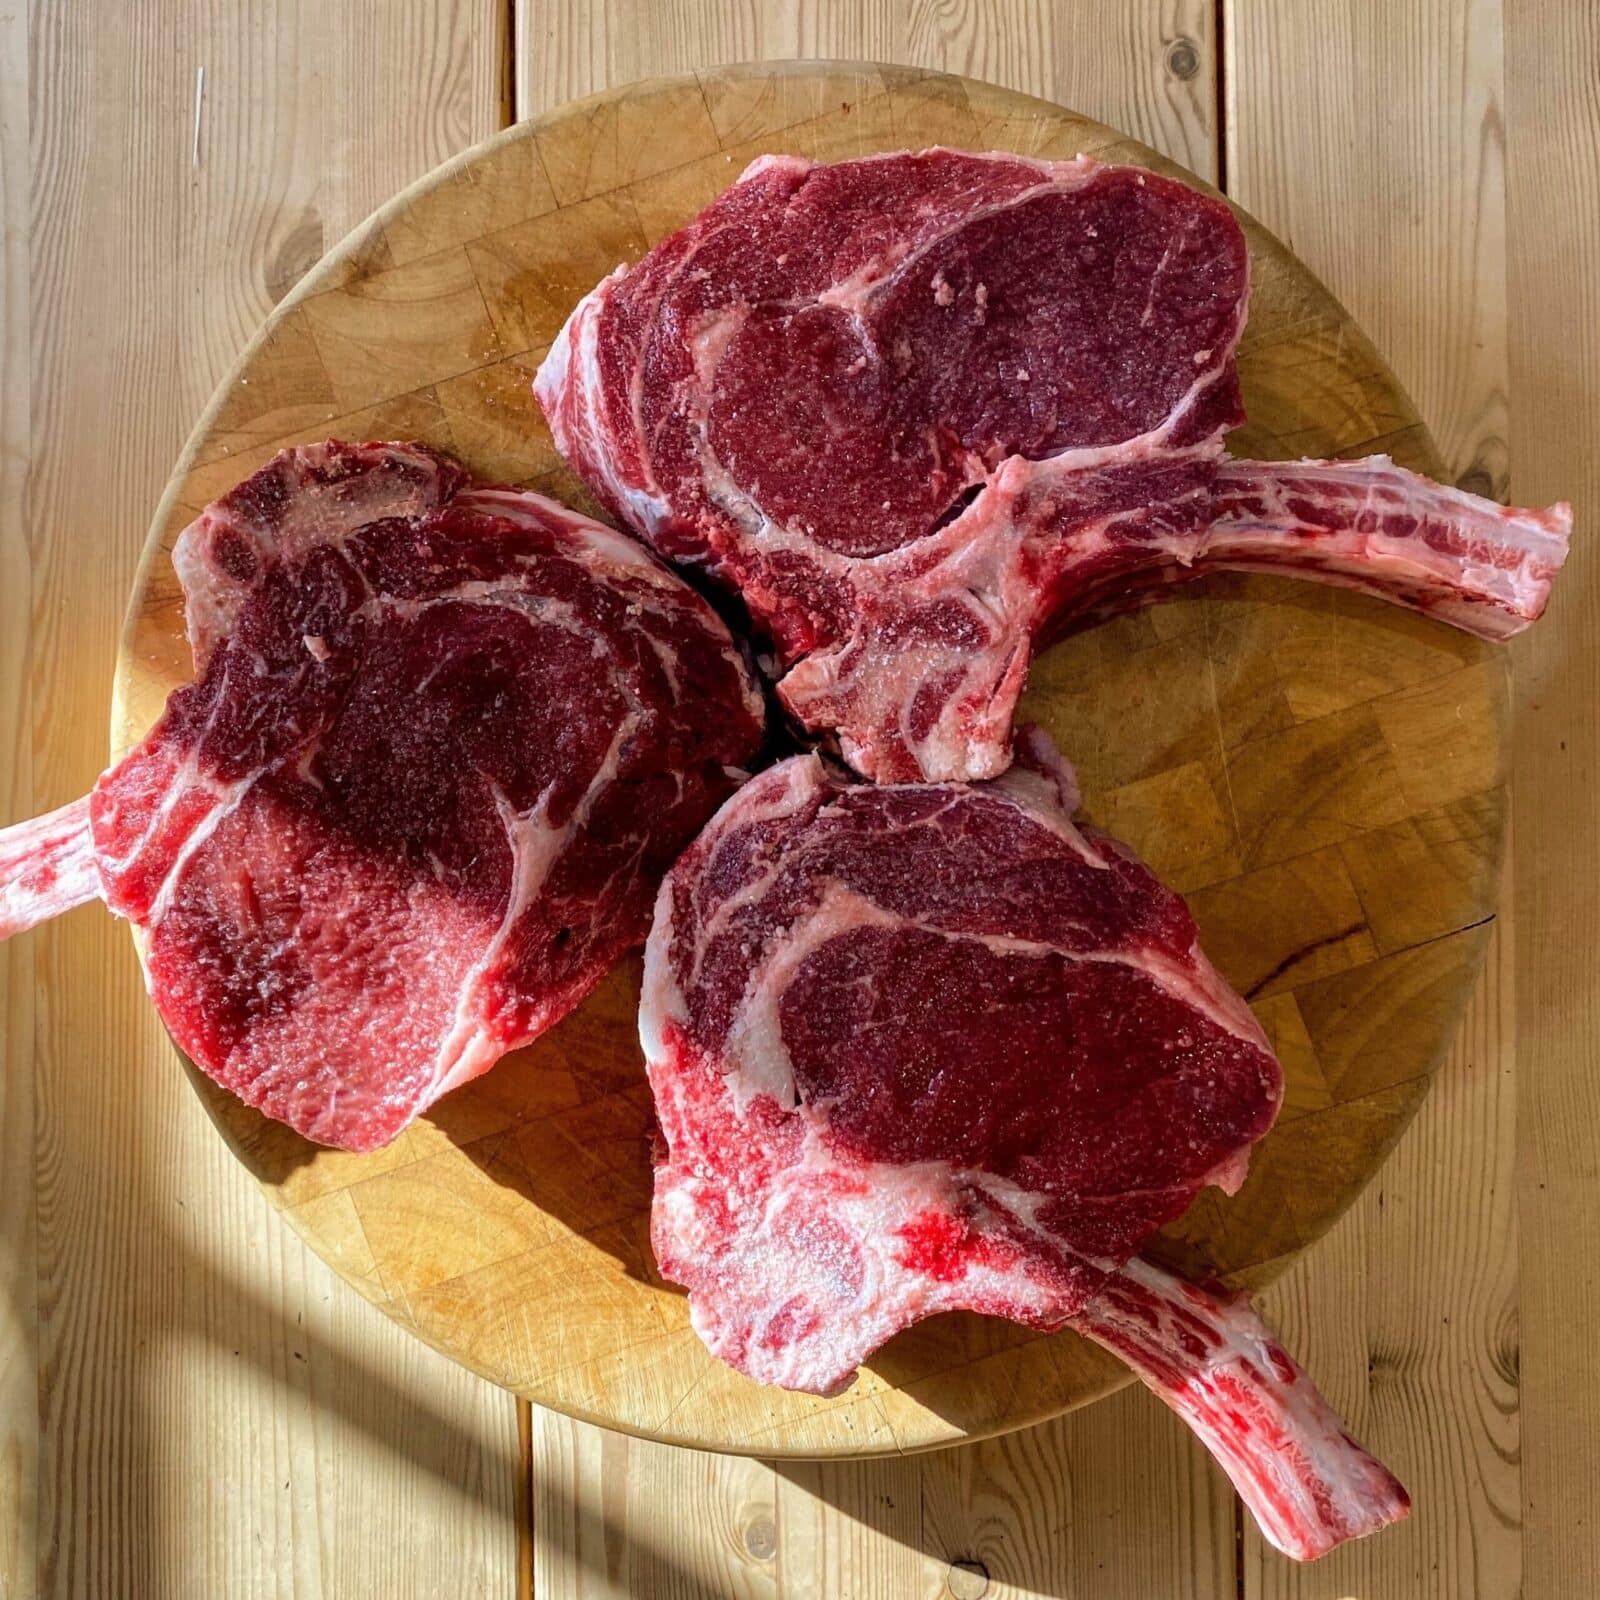 Does eating red meat elevate blood cholesterol levels?